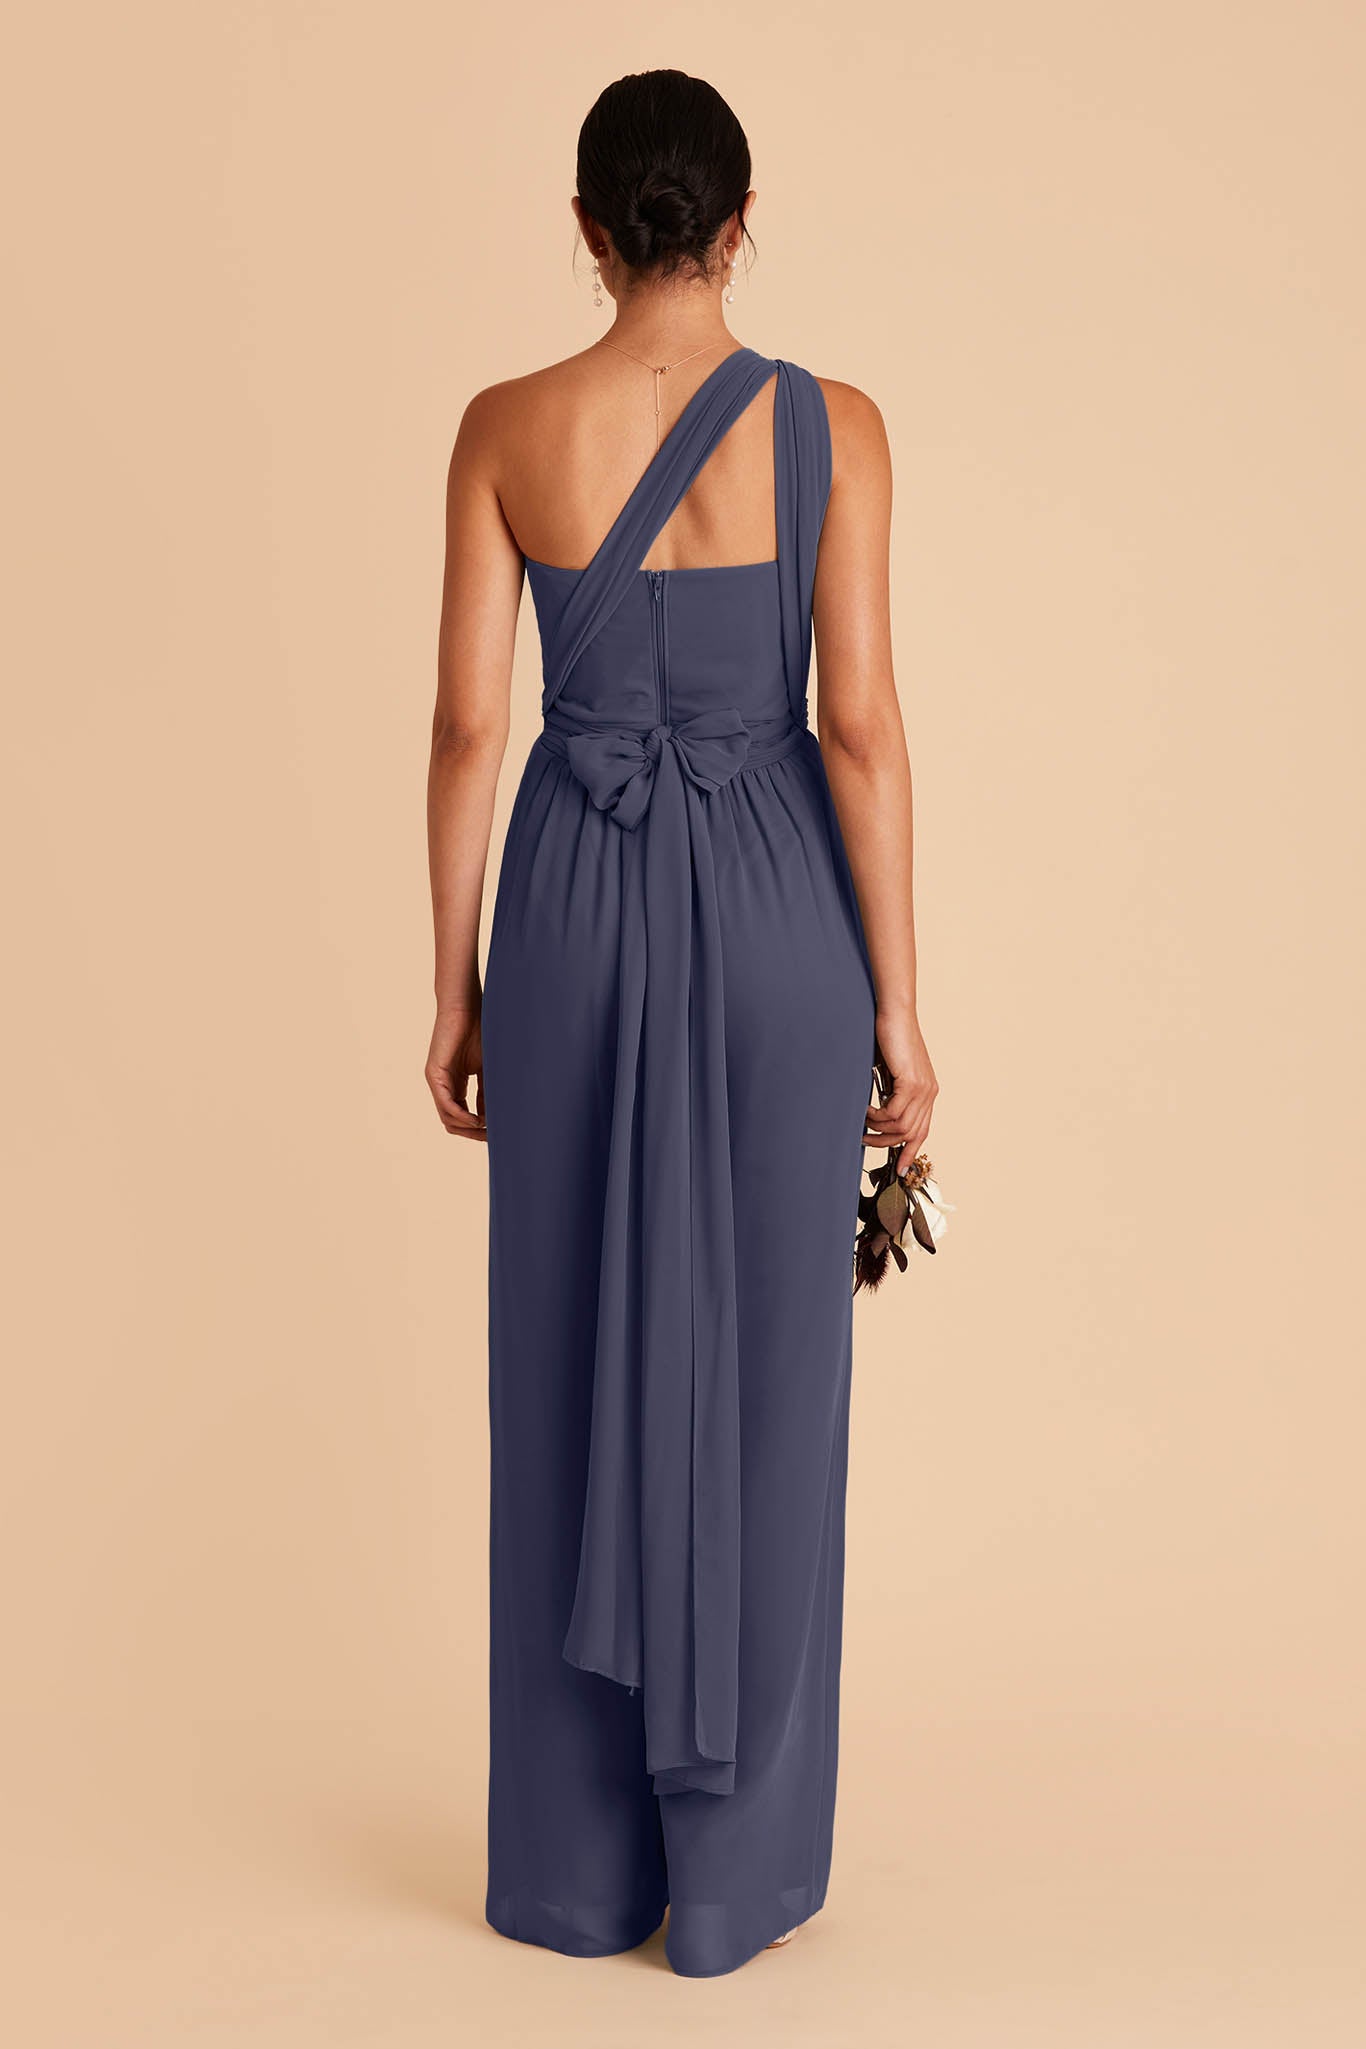 Blue wedding jumpsuit with convertible neckline and tie in the back